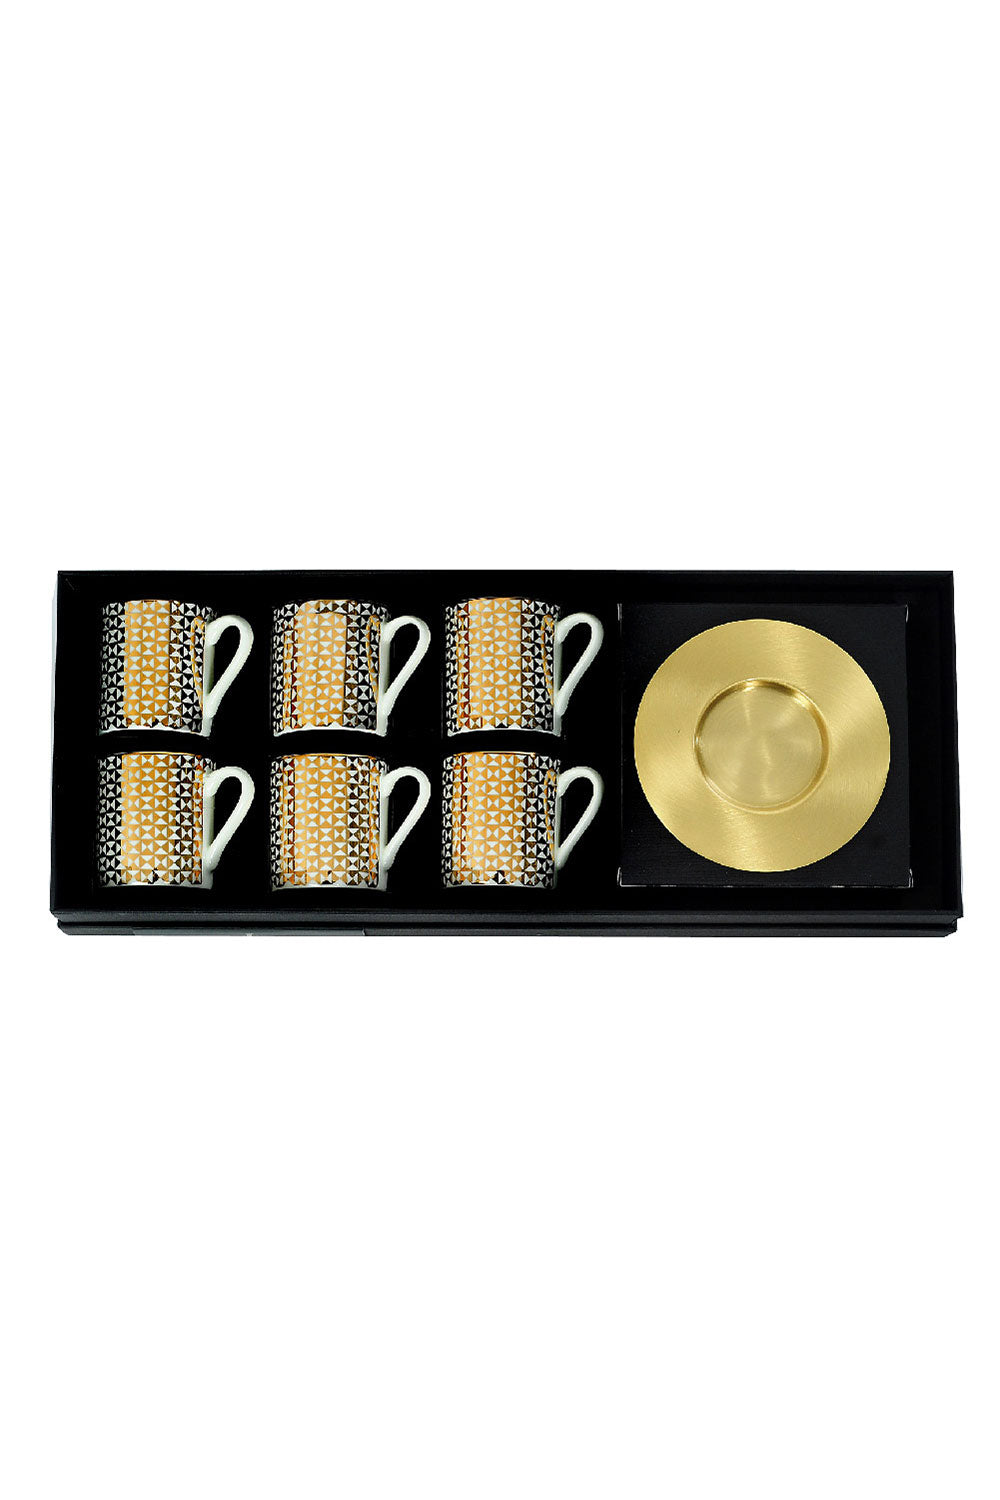 Tri Gold Espresso Cups with Saucer, Set of 6